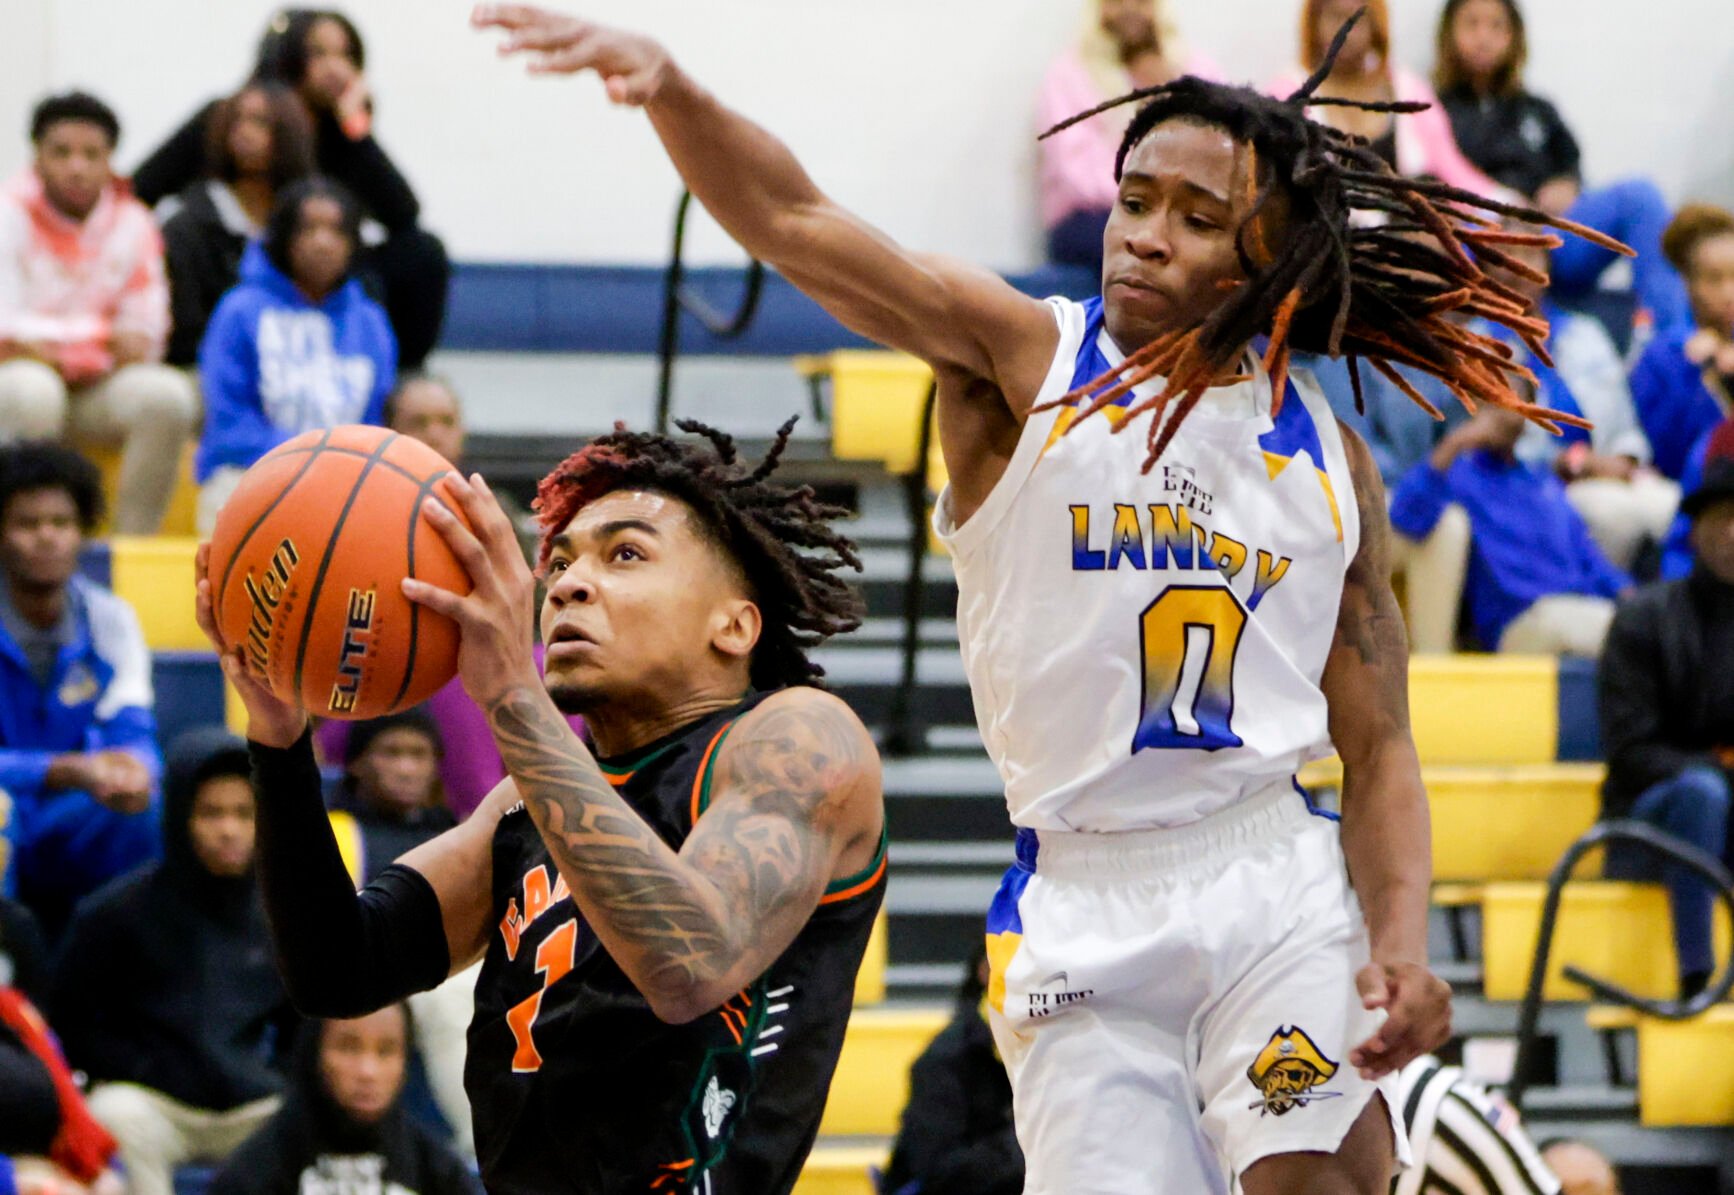 New Orleans Area Boys Basketball Regional Playoff Scores and Quarterfinals Revealed